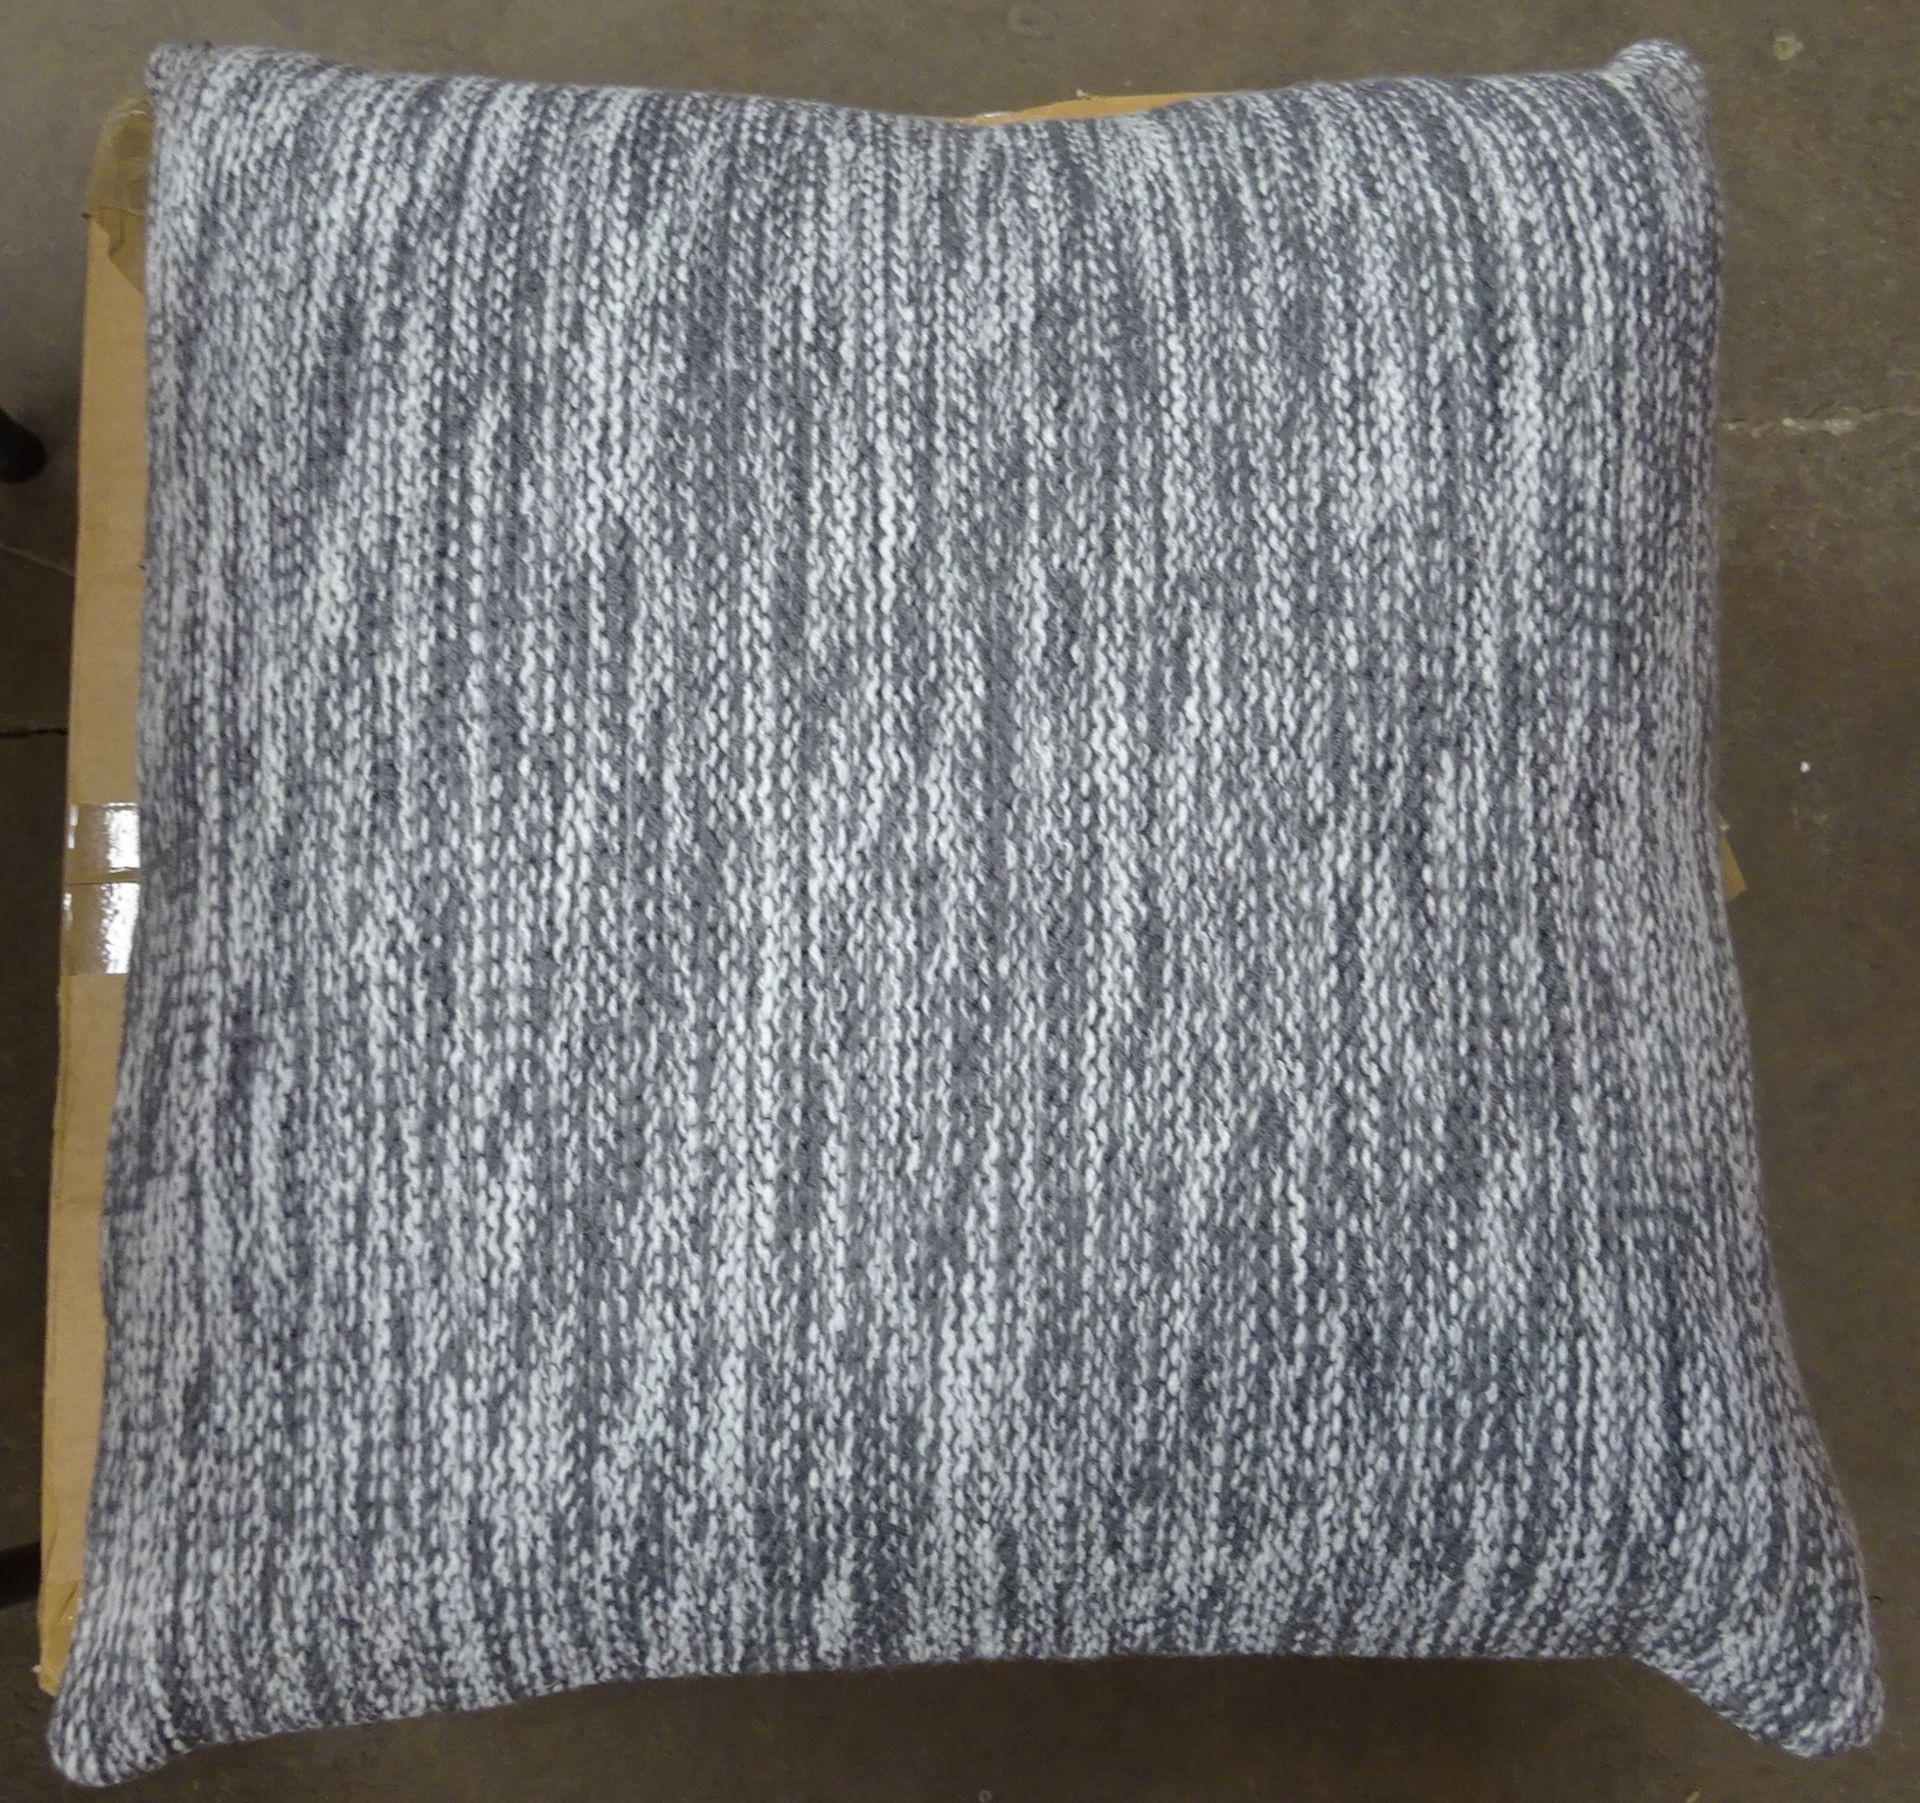 Blain Cushion with Filling